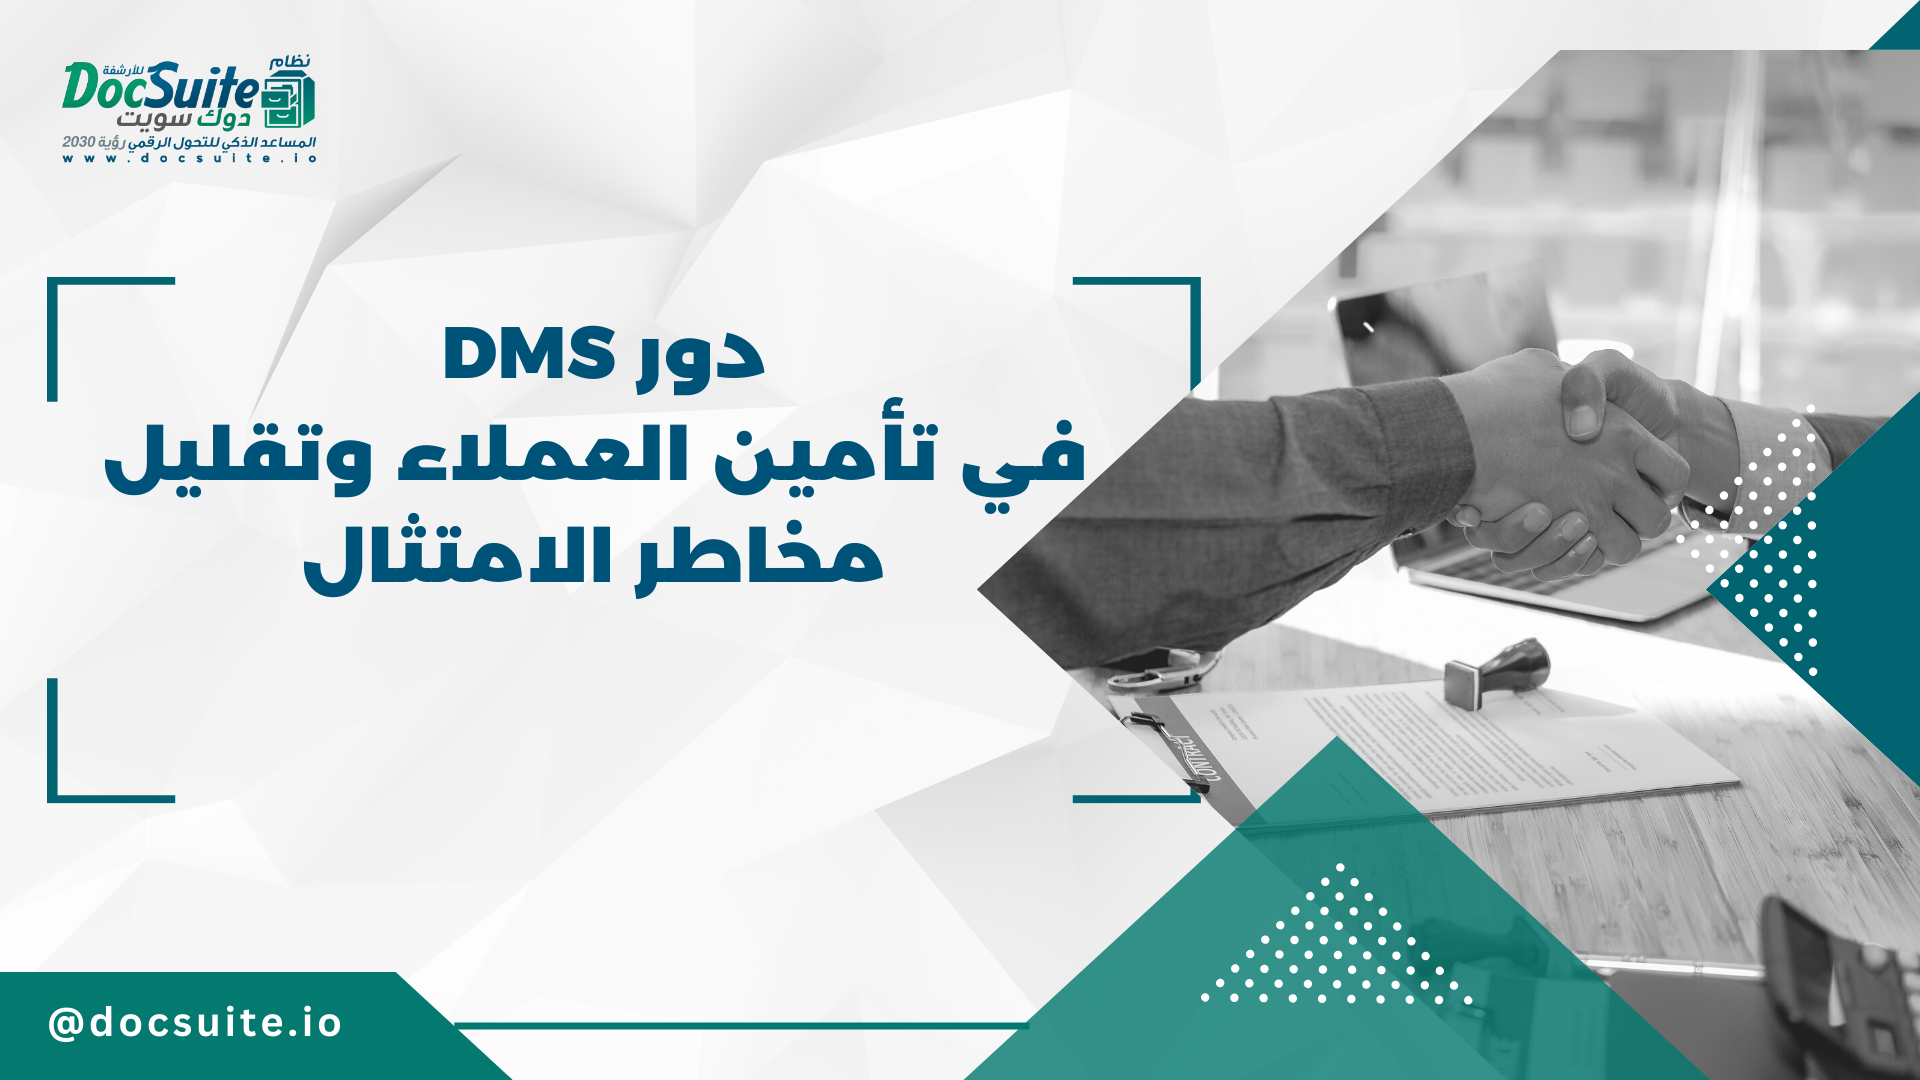 The role of DMS in securing customers and reducing compliance risks